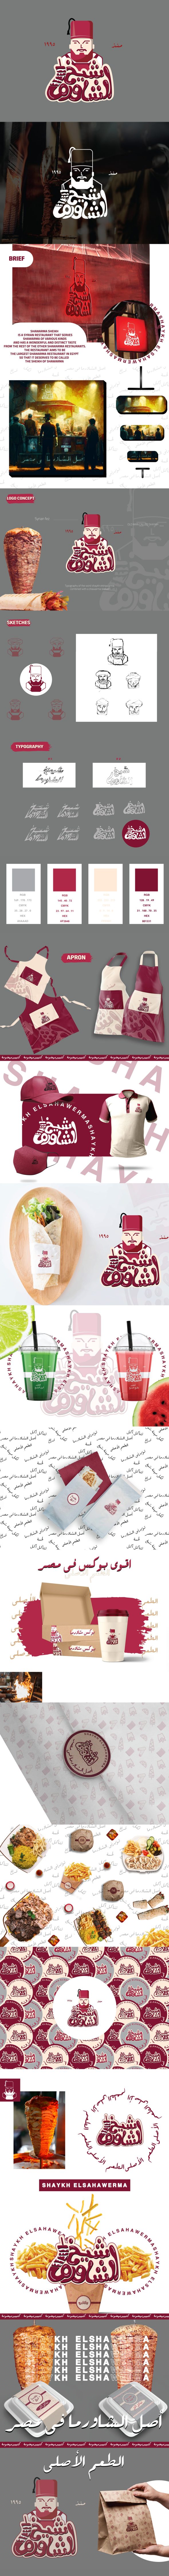 Arabic creative typography logo design for shawarma place with packaging social media and packaging